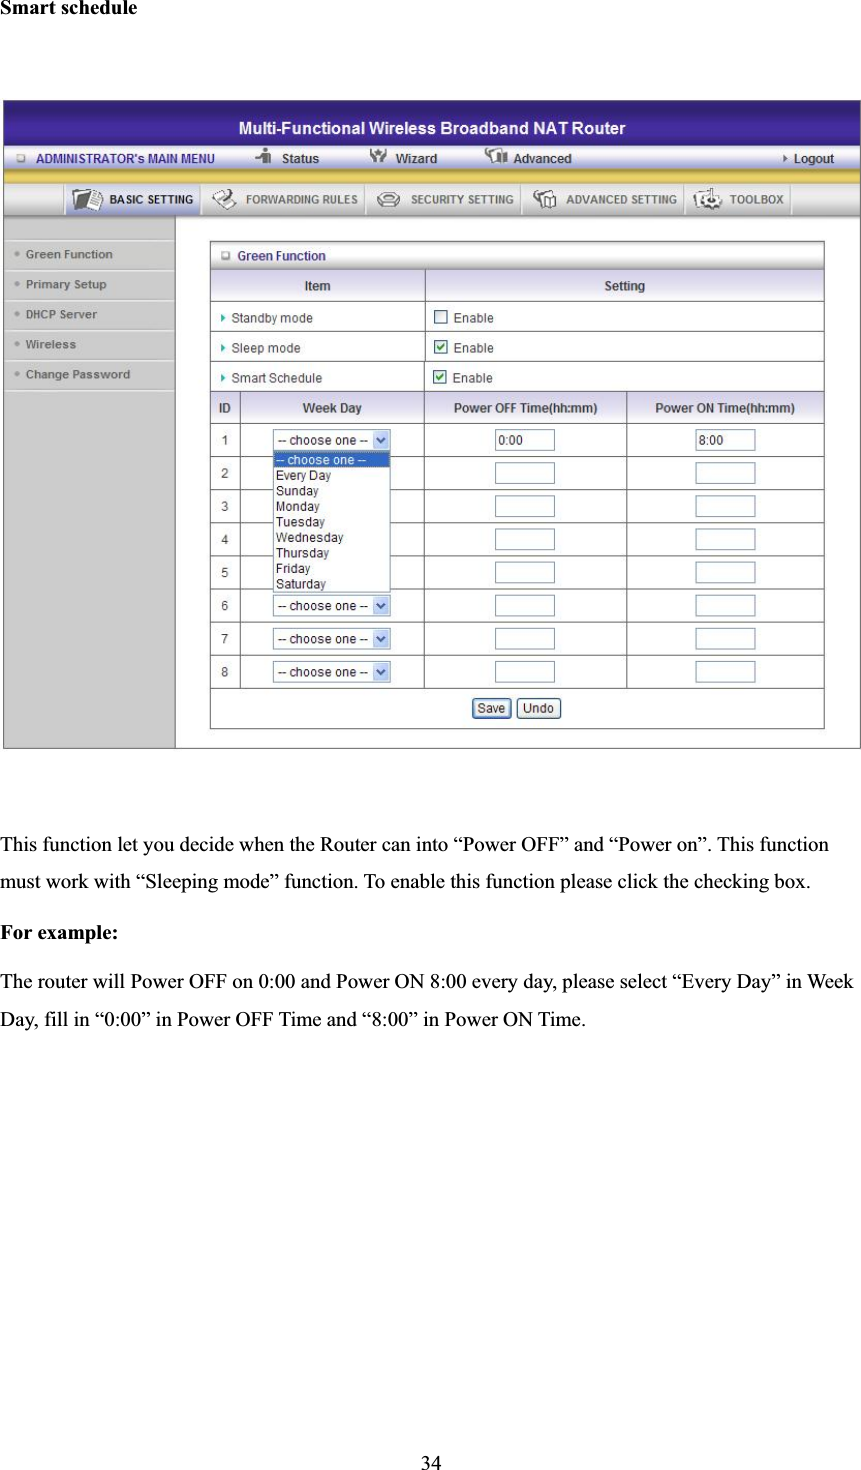 34Smart scheduleThis function let you decide when the Router can into “Power OFF” and “Power on”. This function must work with “Sleeping mode” function. To enable this function please click the checking box. For example: The router will Power OFF on 0:00 and Power ON 8:00 every day, please select “Every Day” in Week Day, fill in “0:00” in Power OFF Time and “8:00” in Power ON Time. 